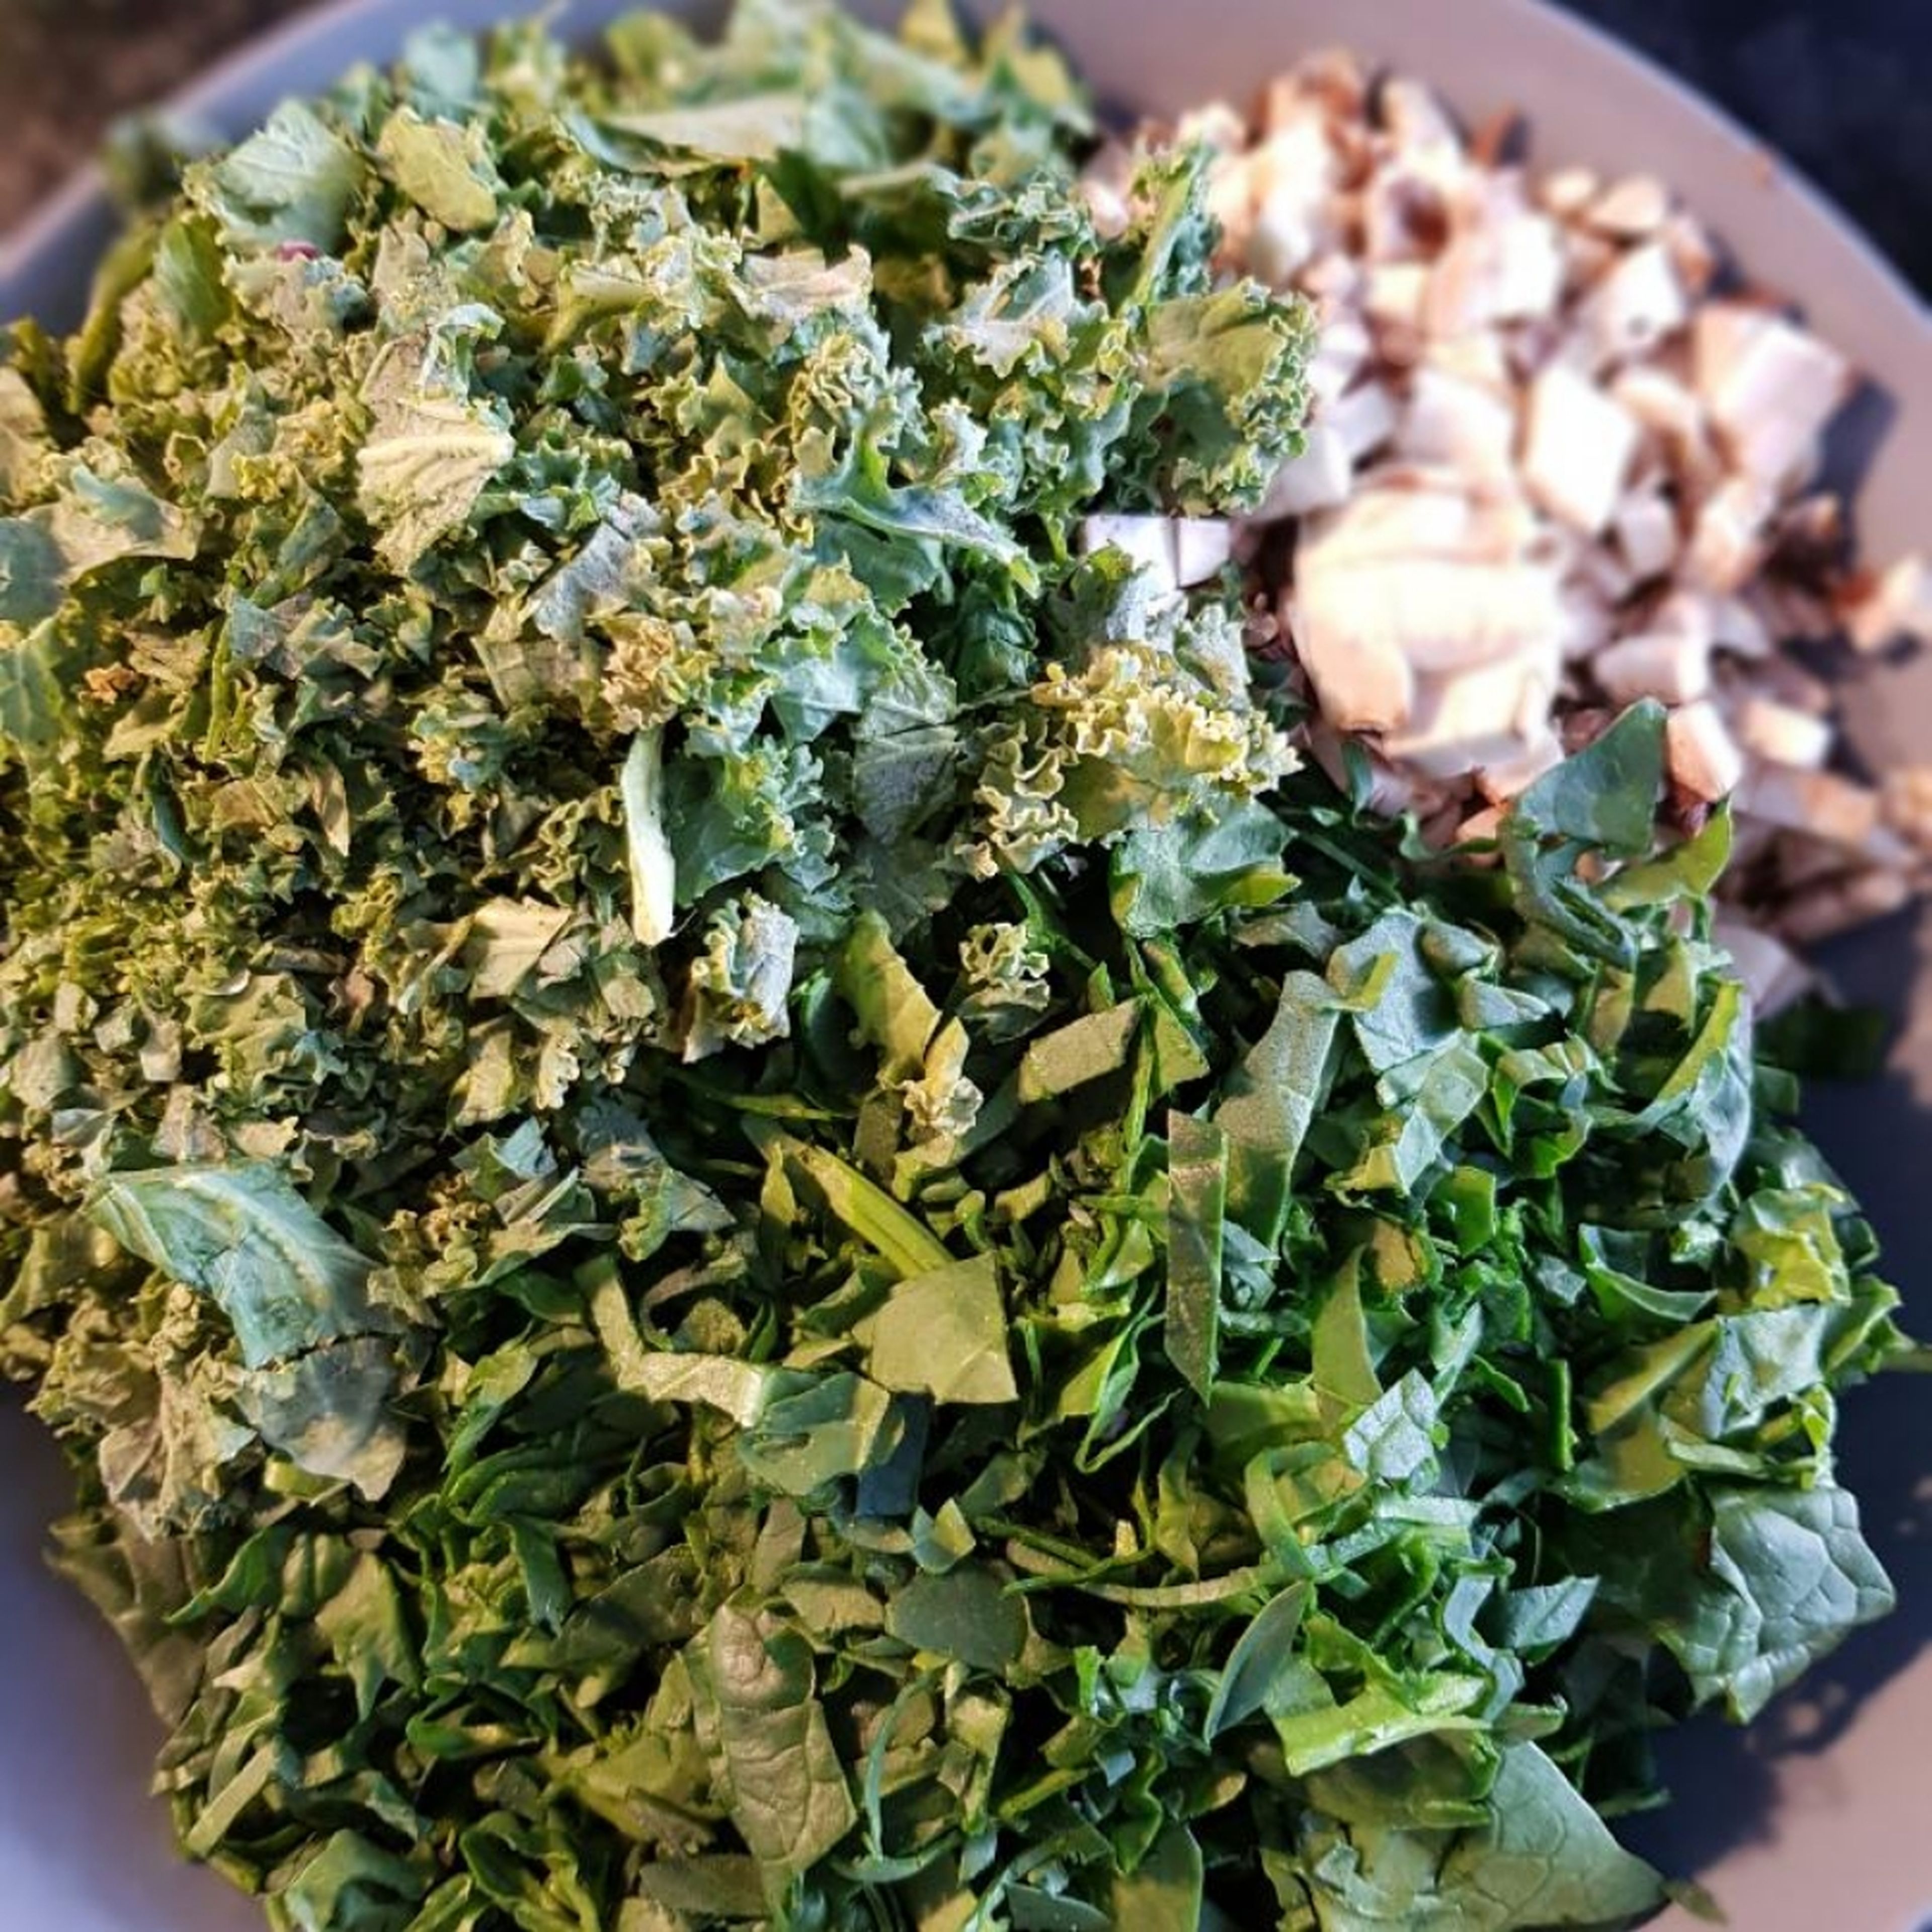 At the same time roughly chop kale (taking out the harder part), spinach and mushrooms. When the first mix start to brown up, add this mix to the pan. Be careful: you don't want the veggies to be mushy but crunchy and tasty.